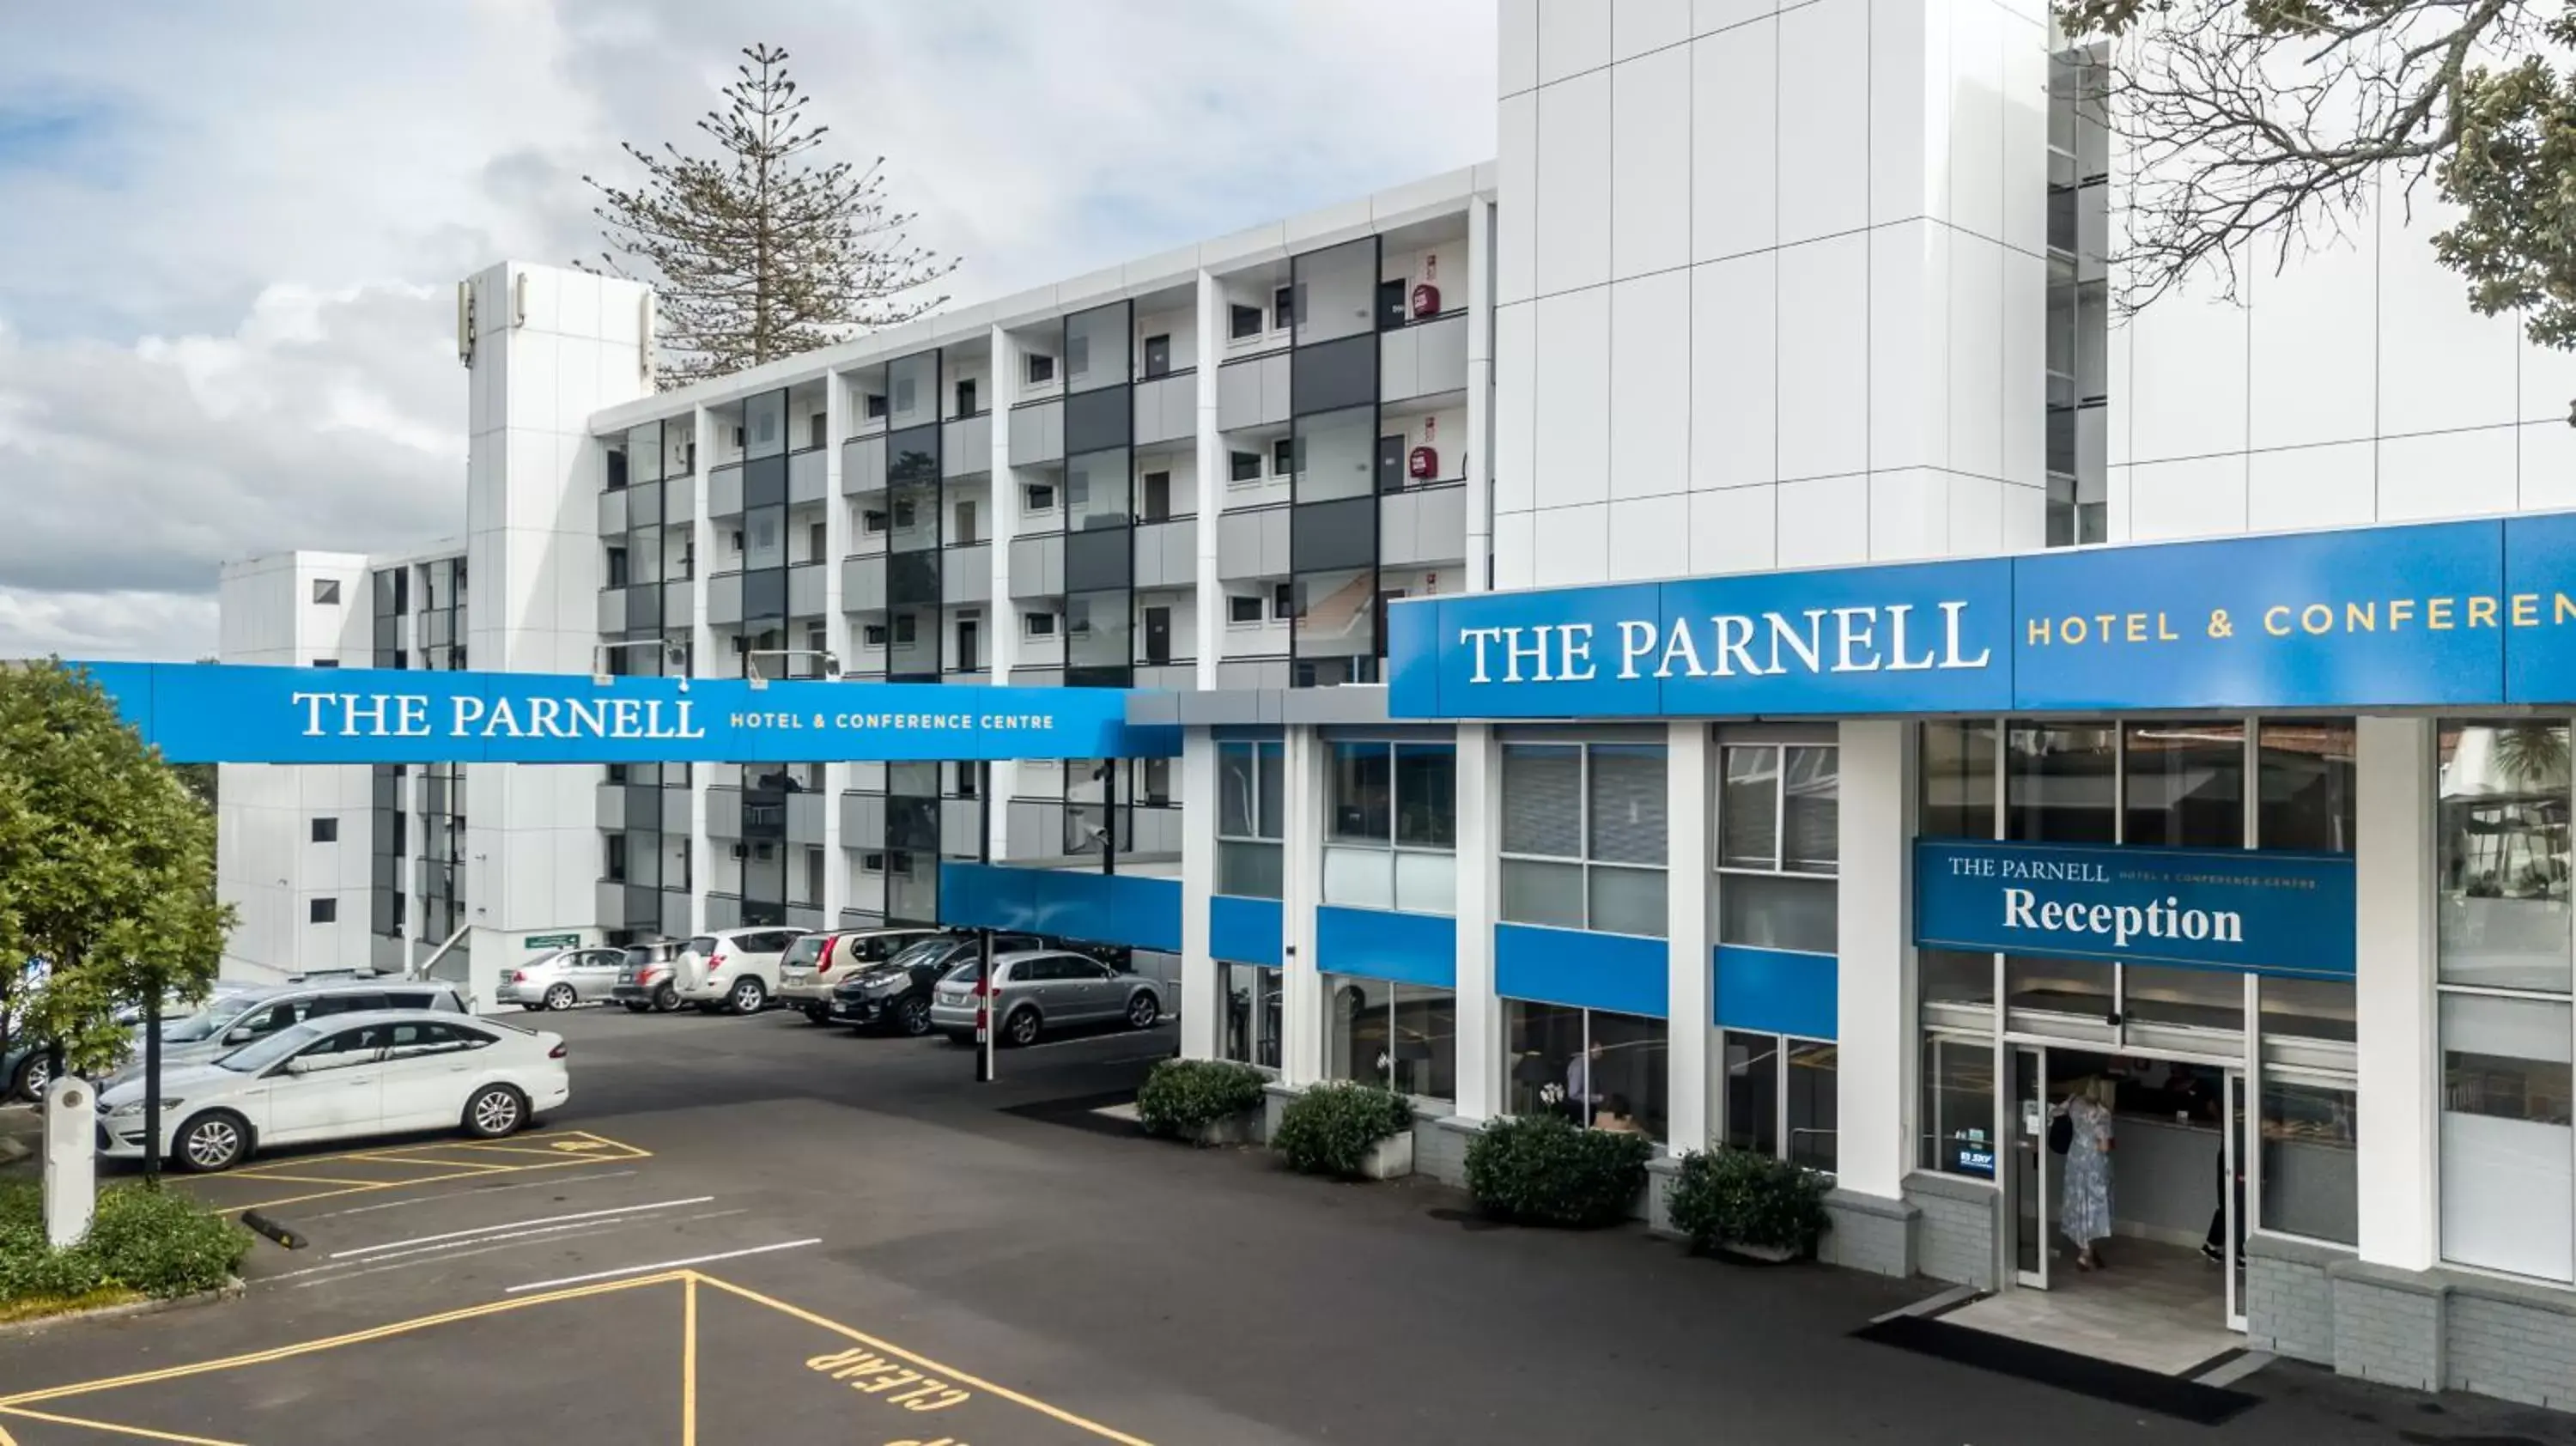 On site, Property Building in The Parnell Hotel & Conference Centre